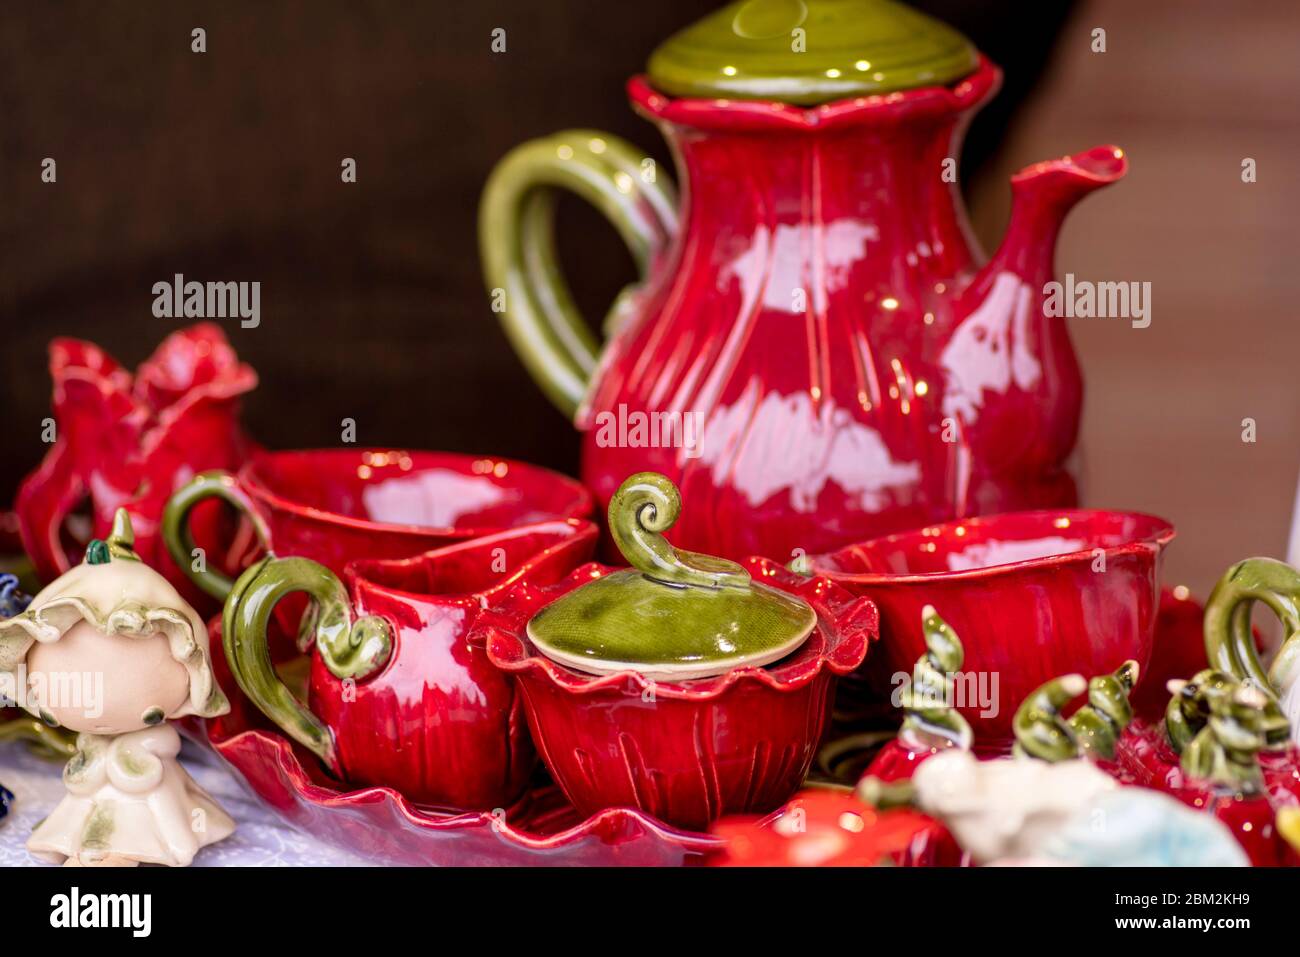 Set of clean dishes and cups . Handmade ceramic, catering, restaurant, healthy eating.Porcelain multi-colored dishes. multi-colored glass decorative t Stock Photo